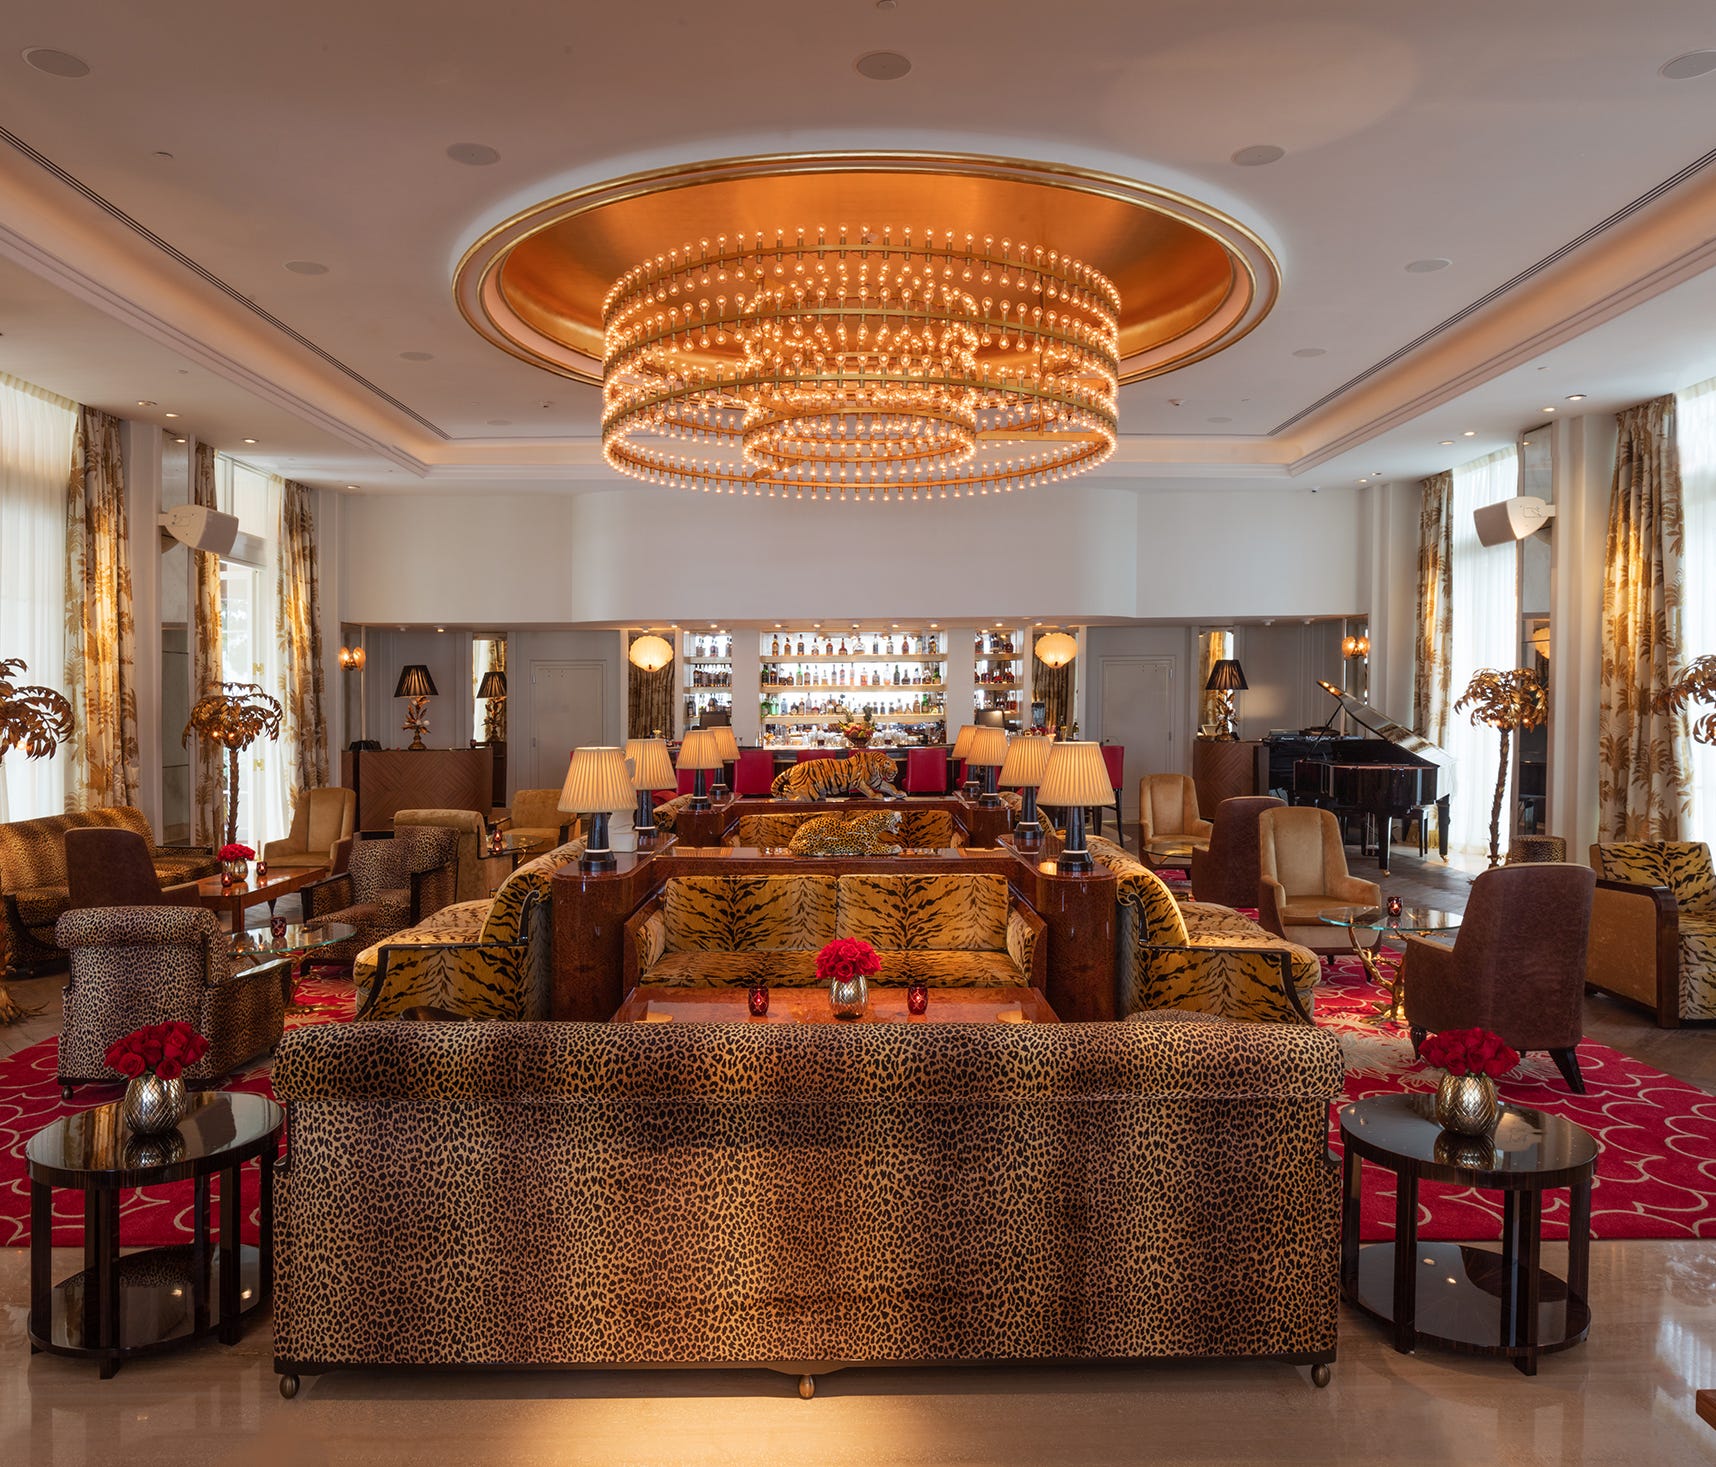 The Faena Hotel Miami Beach has earned Five-Star status from Forbes Travel Guide.